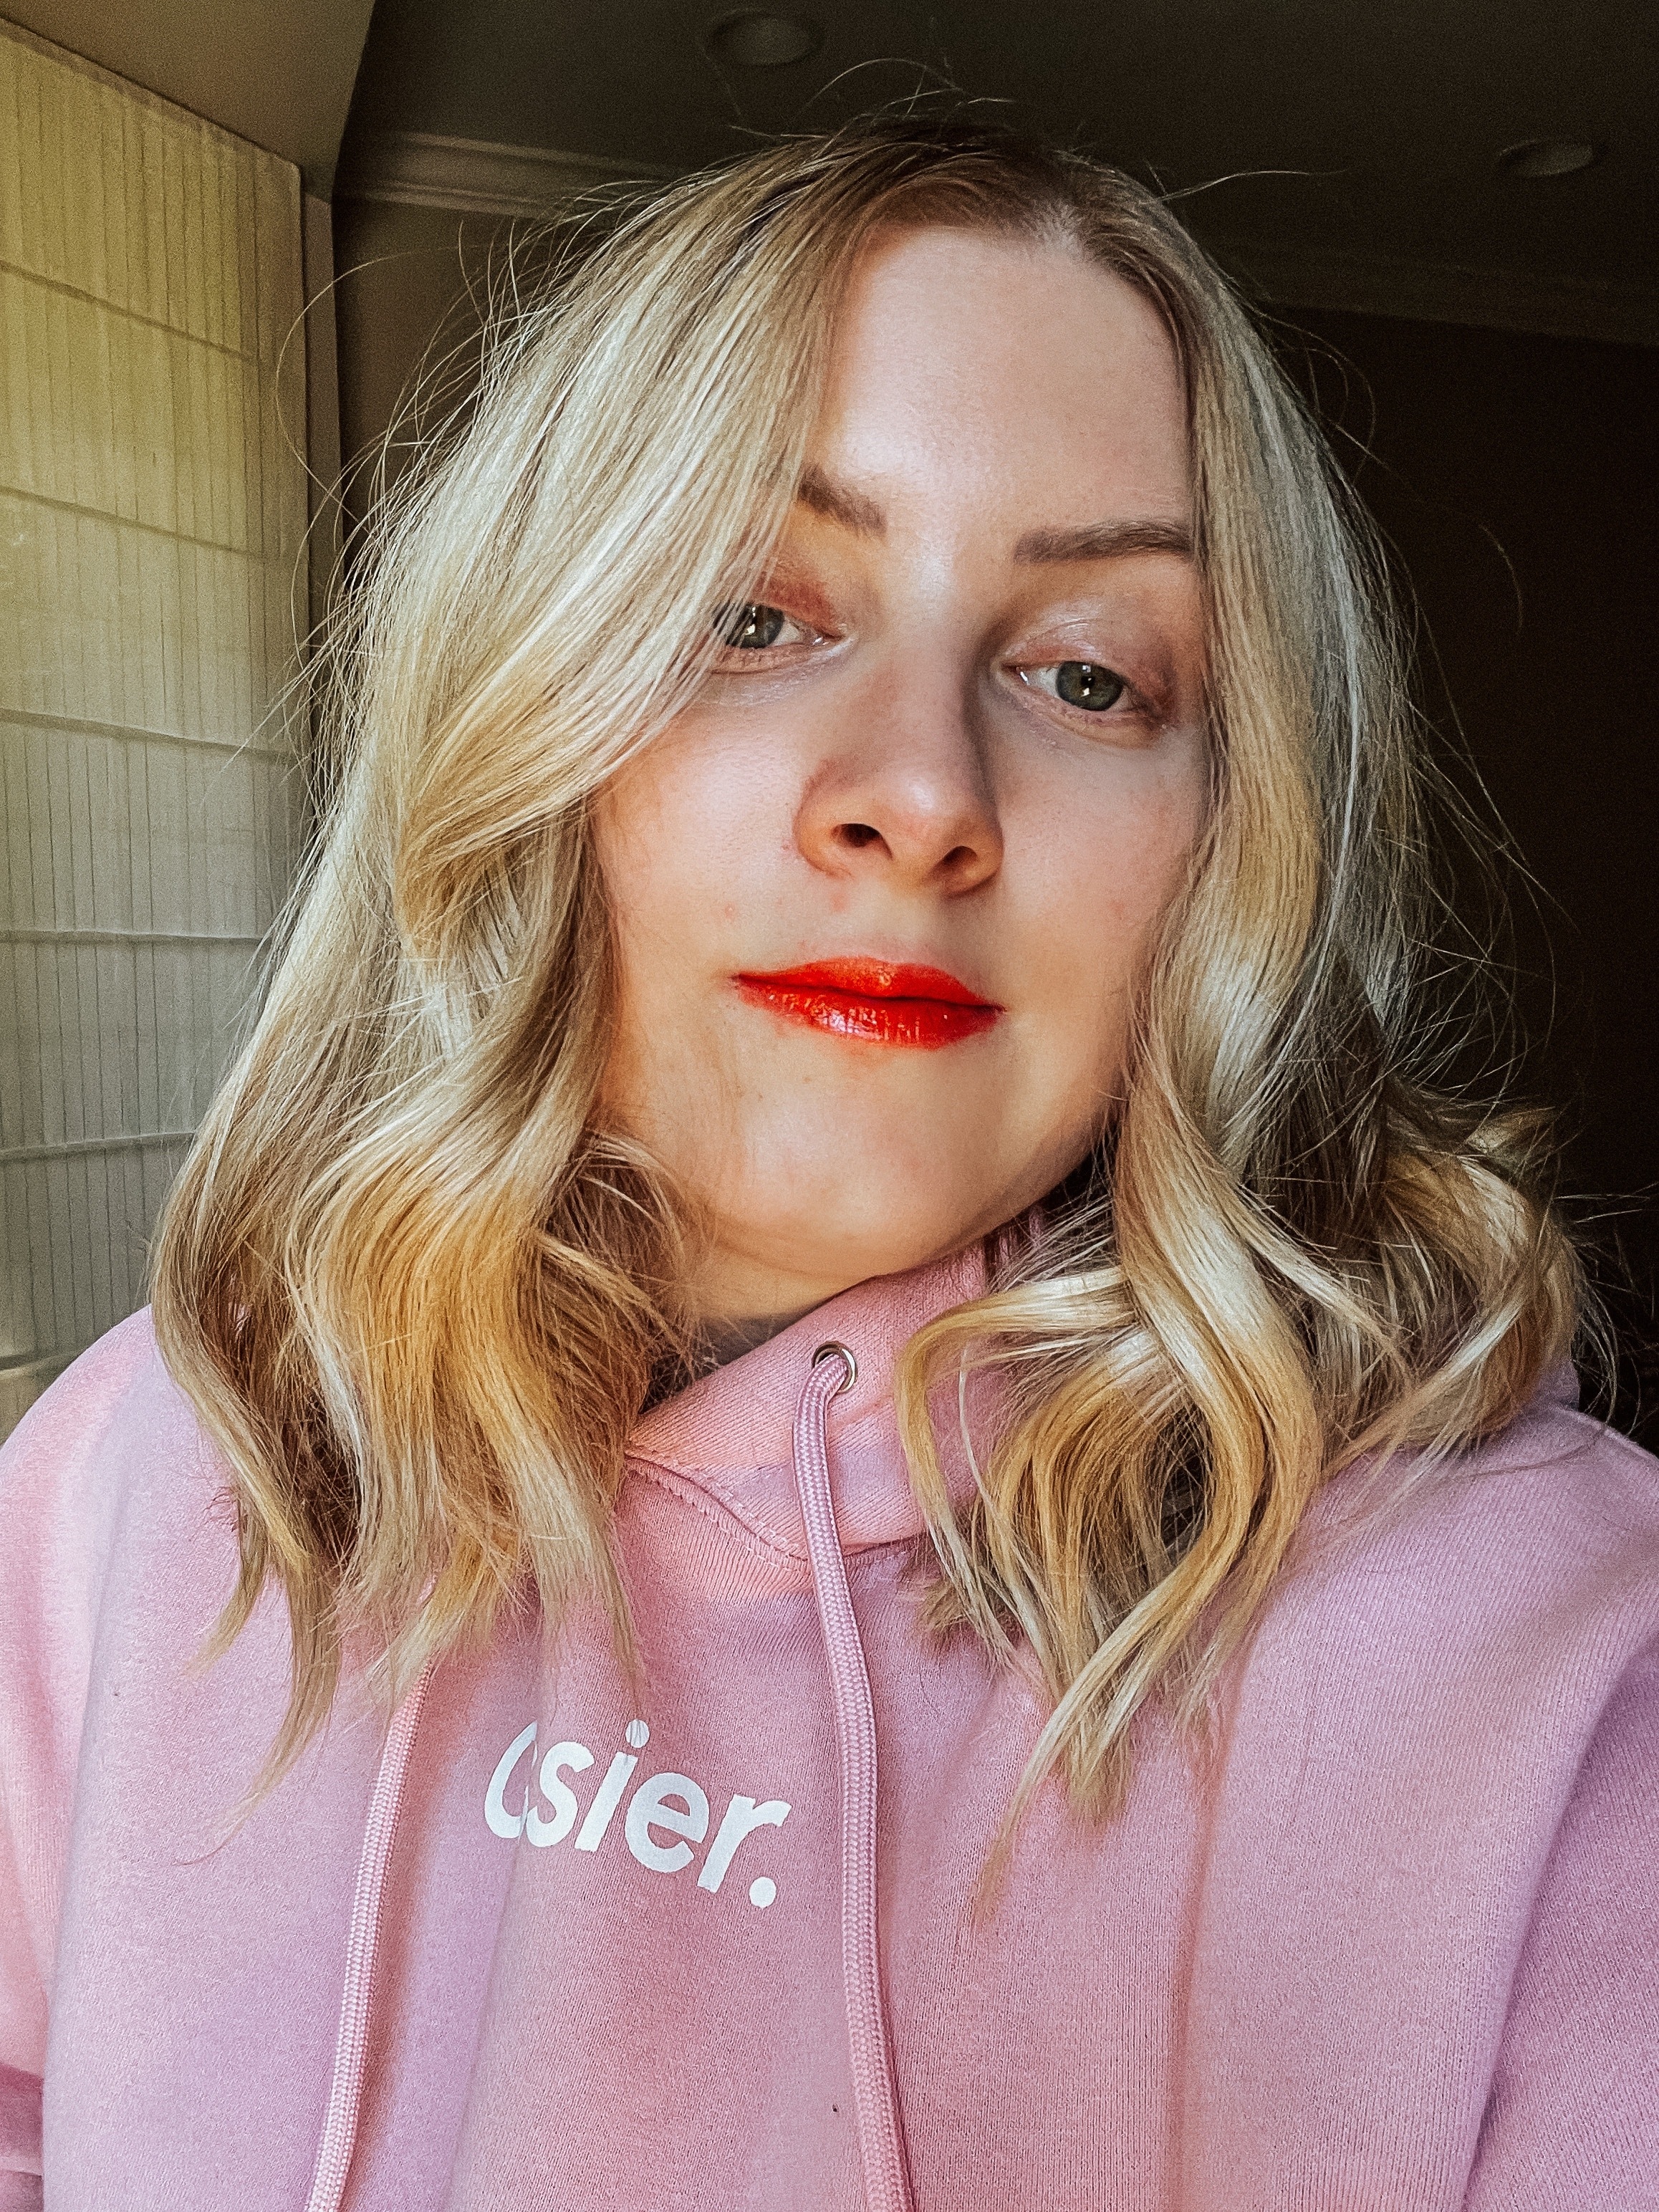 Kelsey from Blondes and Bagels reviews the NEW Glossier Ultralip! Find the pros, cons, and swatches of Ultralip in this review.